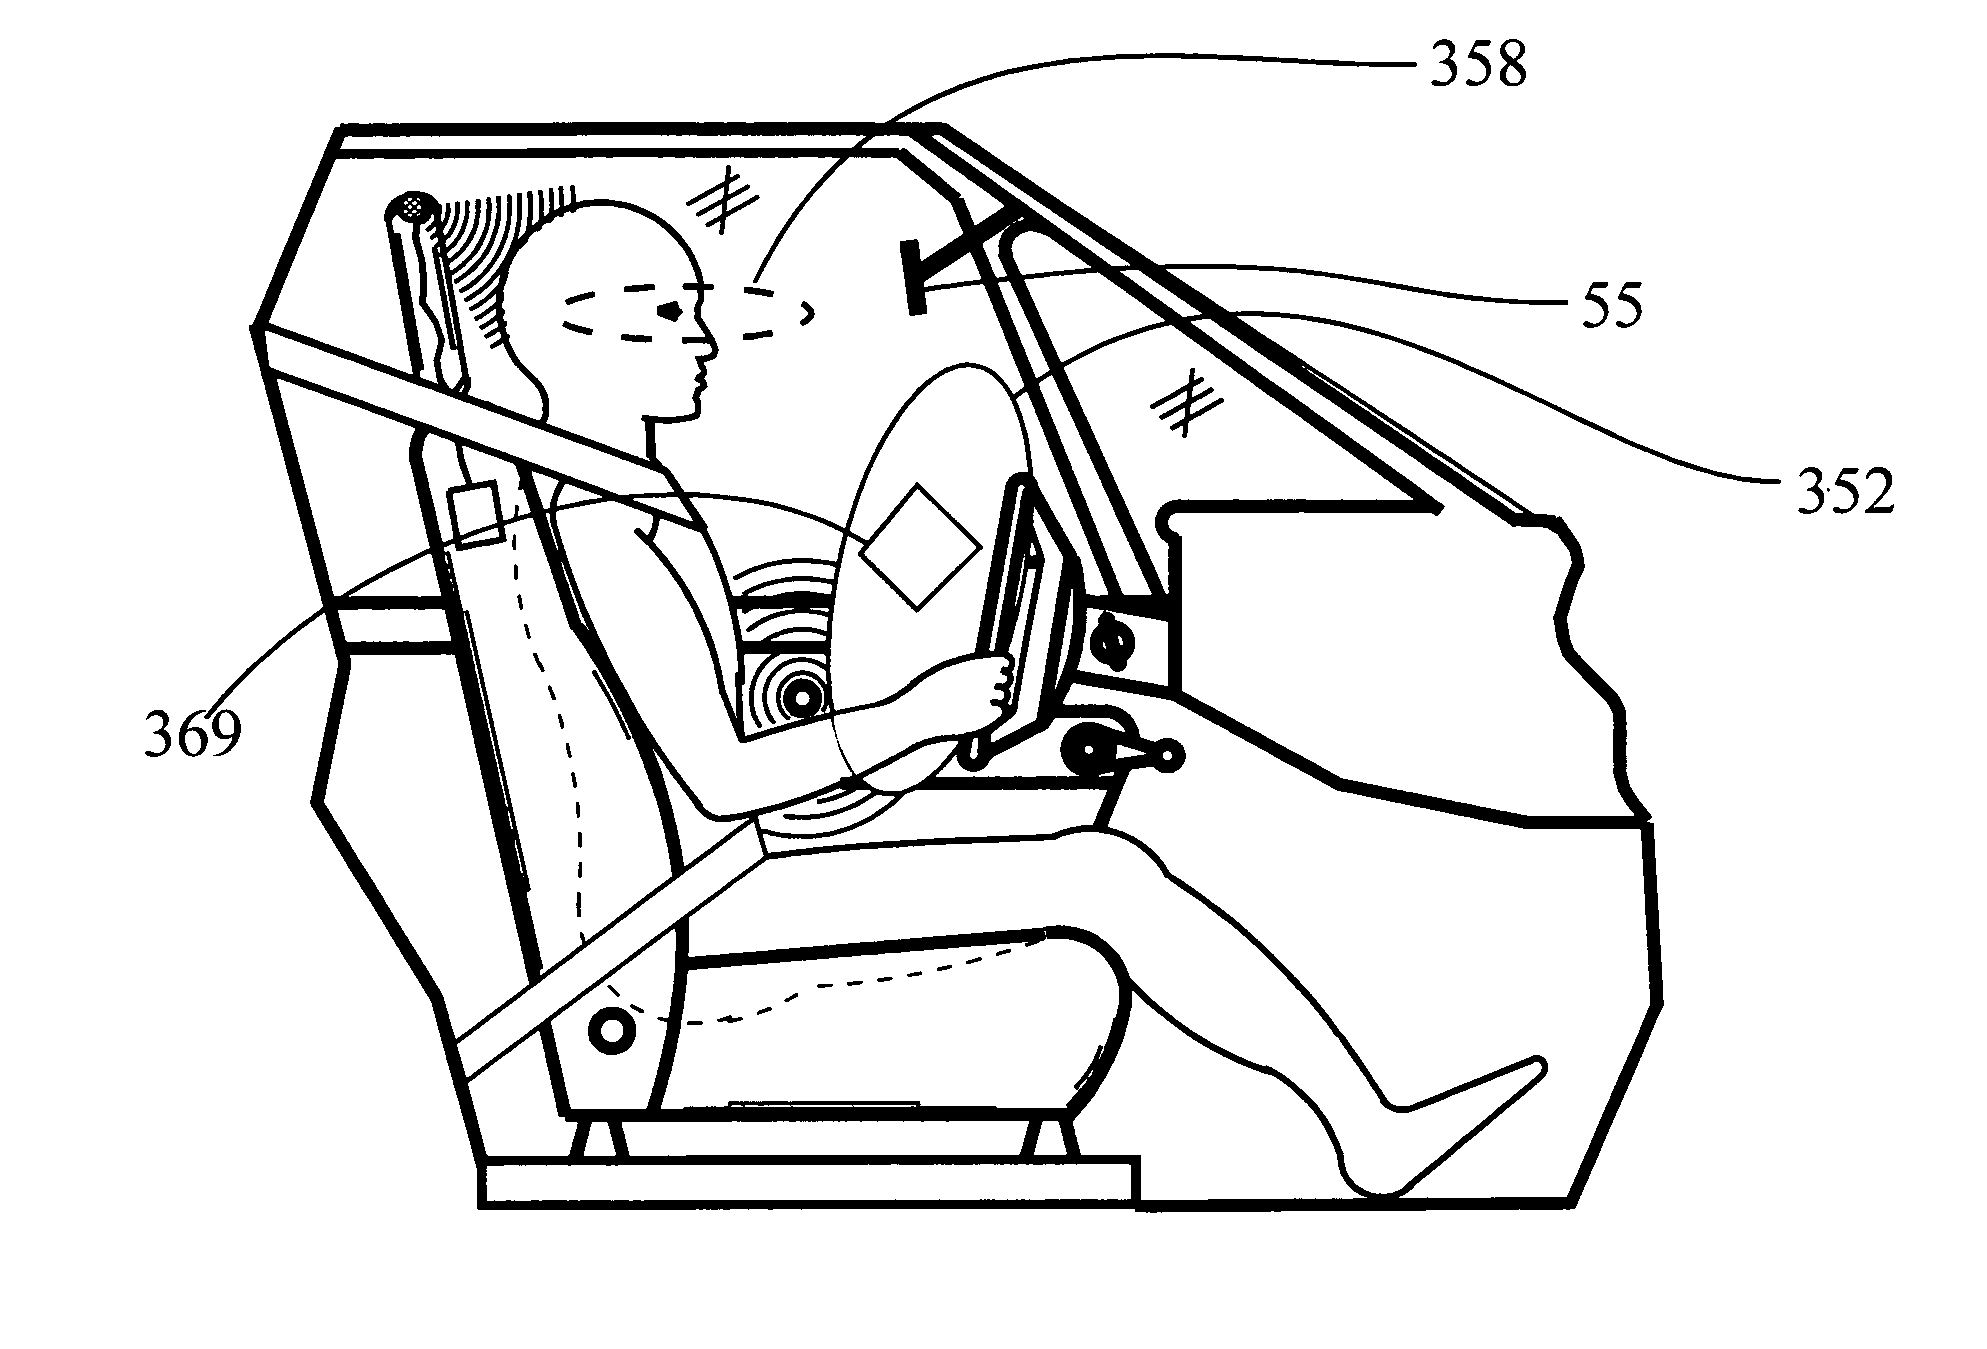 Method for airbag inflation control